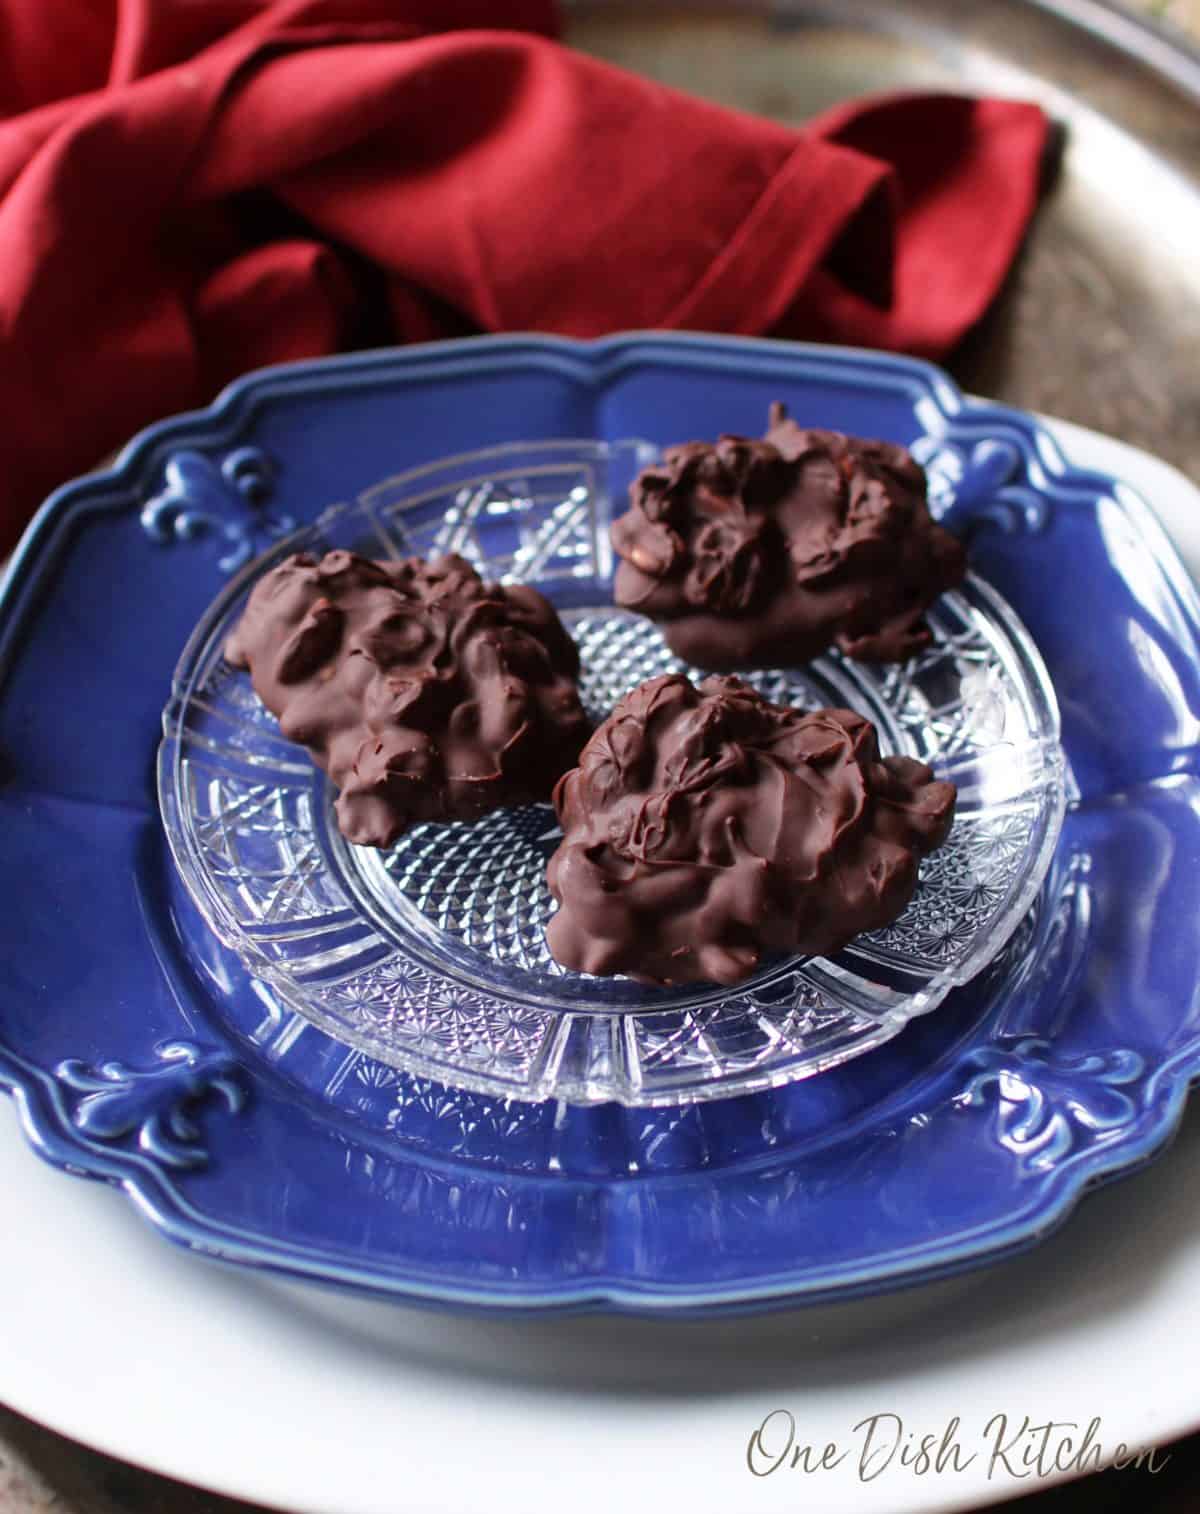 Three chocolate candies on a clear plate on top of a big blue plate on a tray with a red cloth napkin.